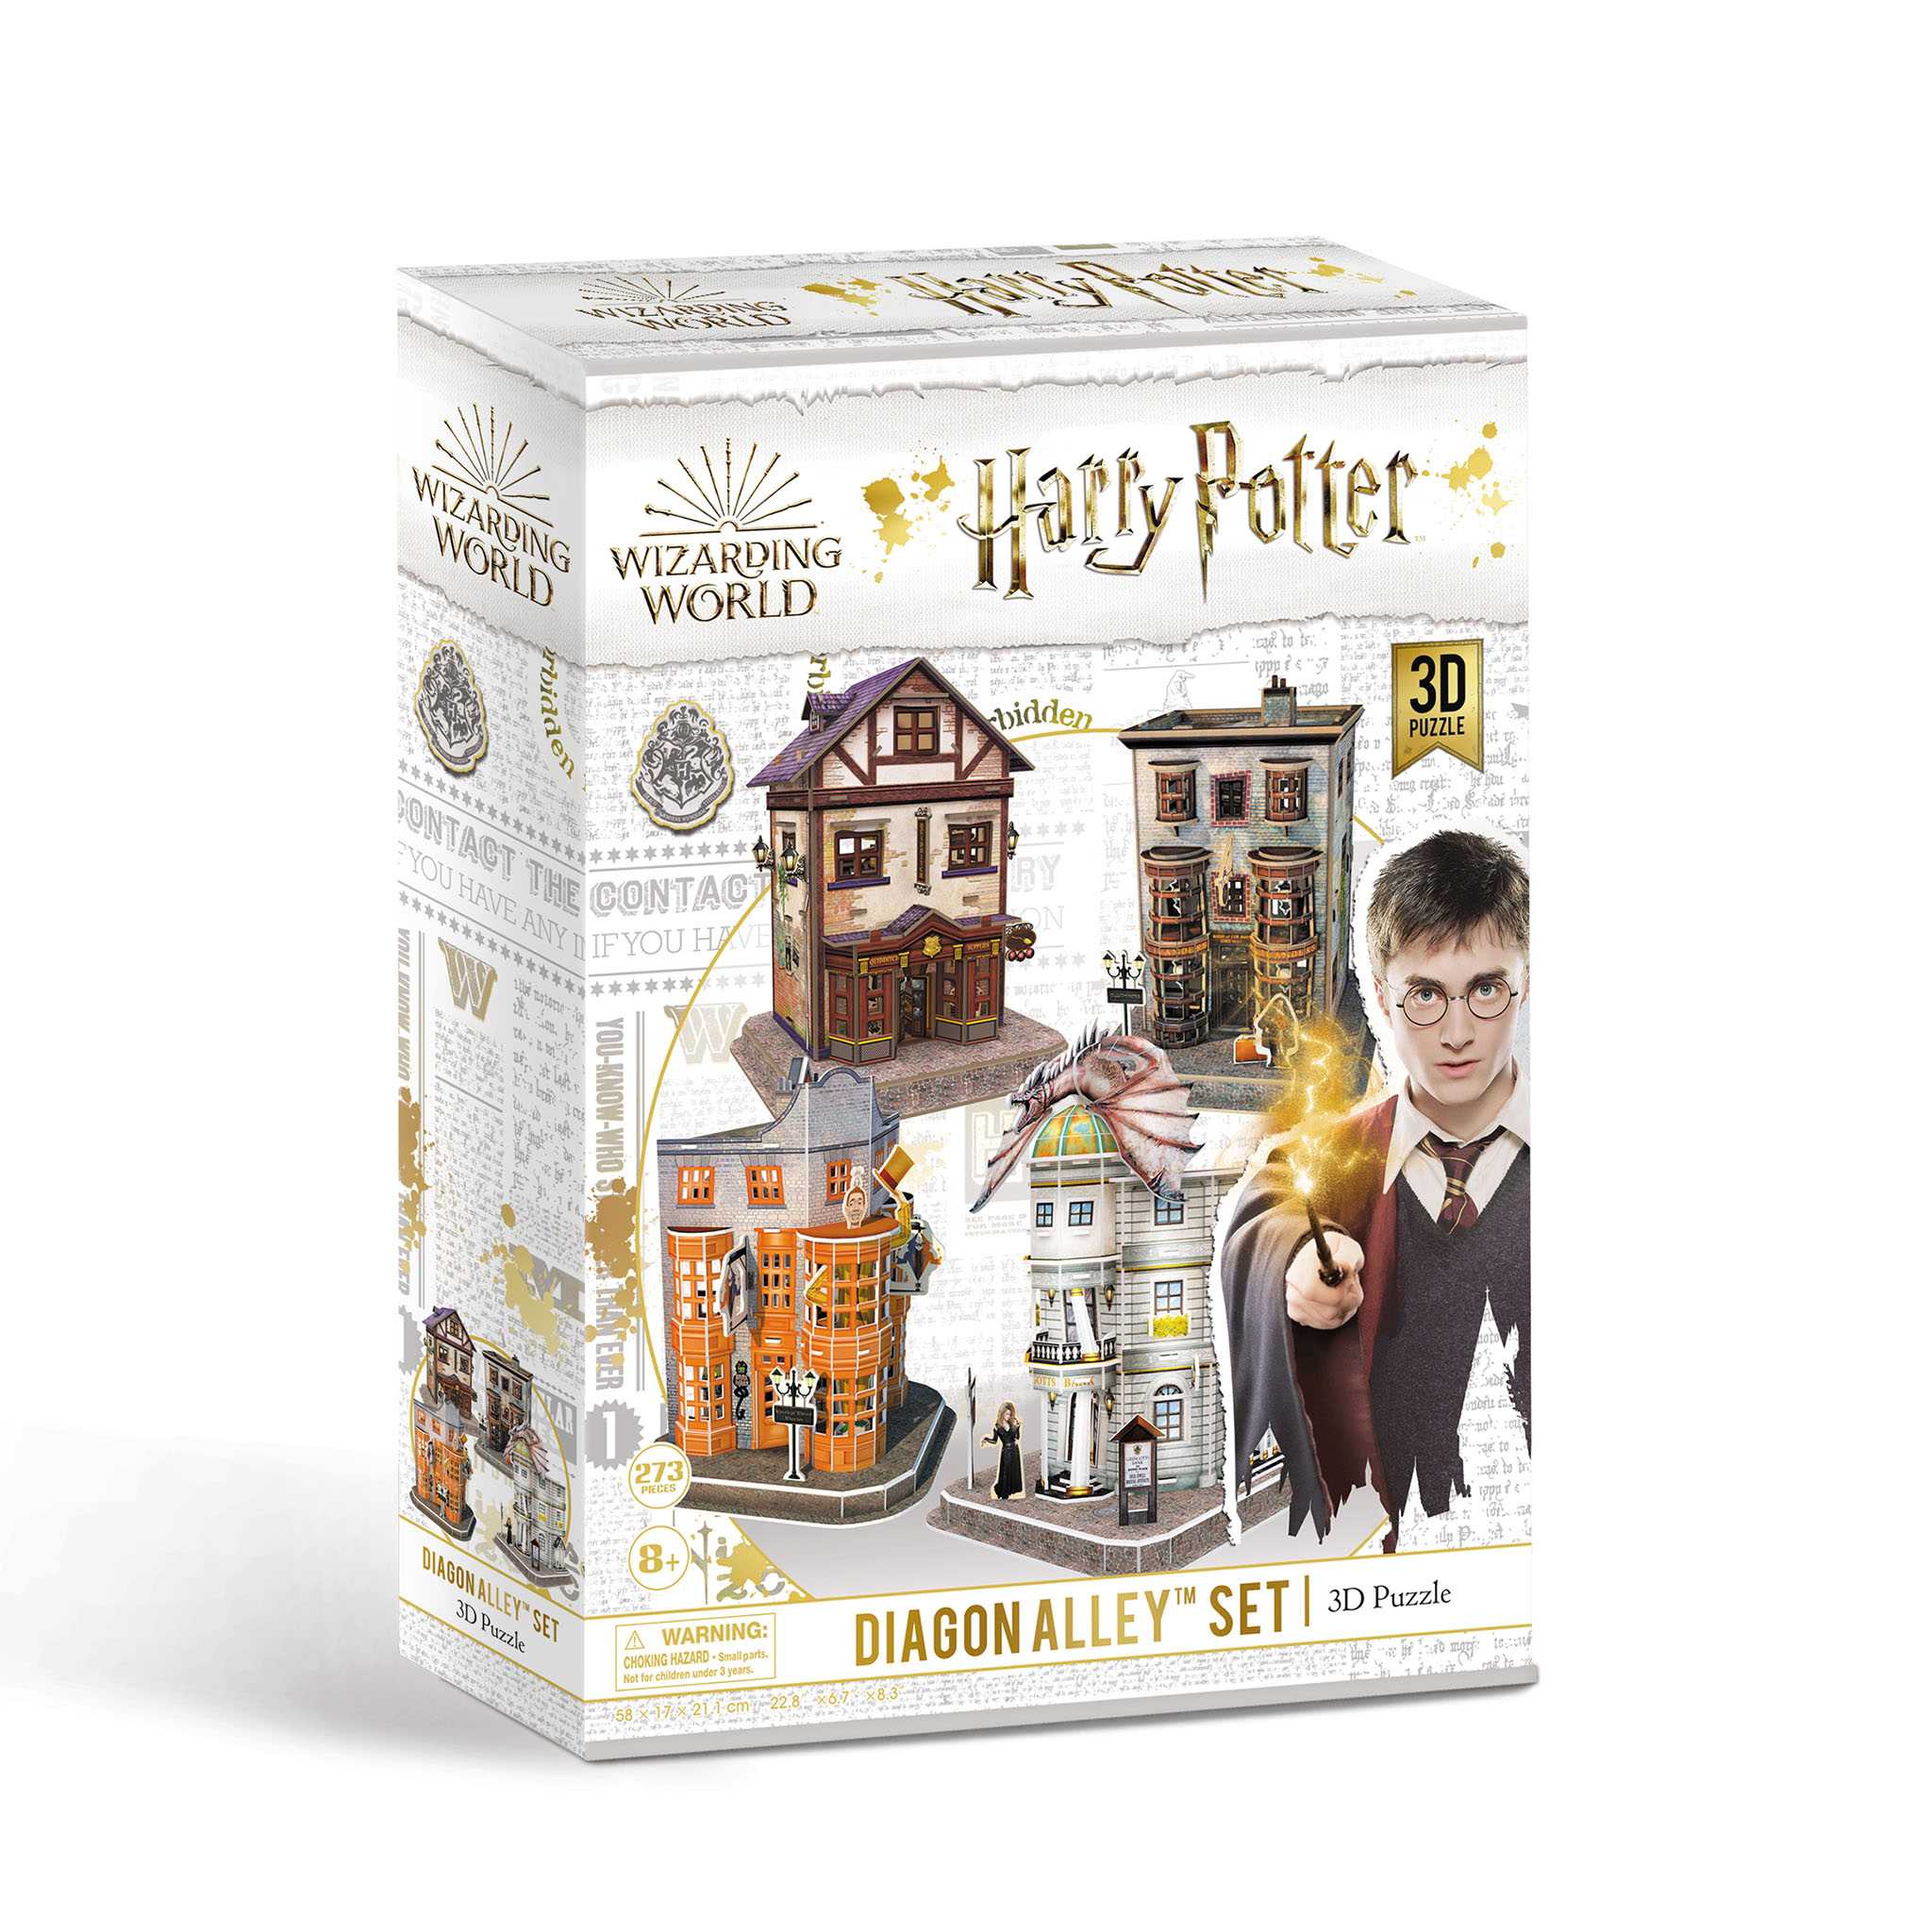 3D PuzzleRevell 00304 - Harry Potter Diagon Alley Set